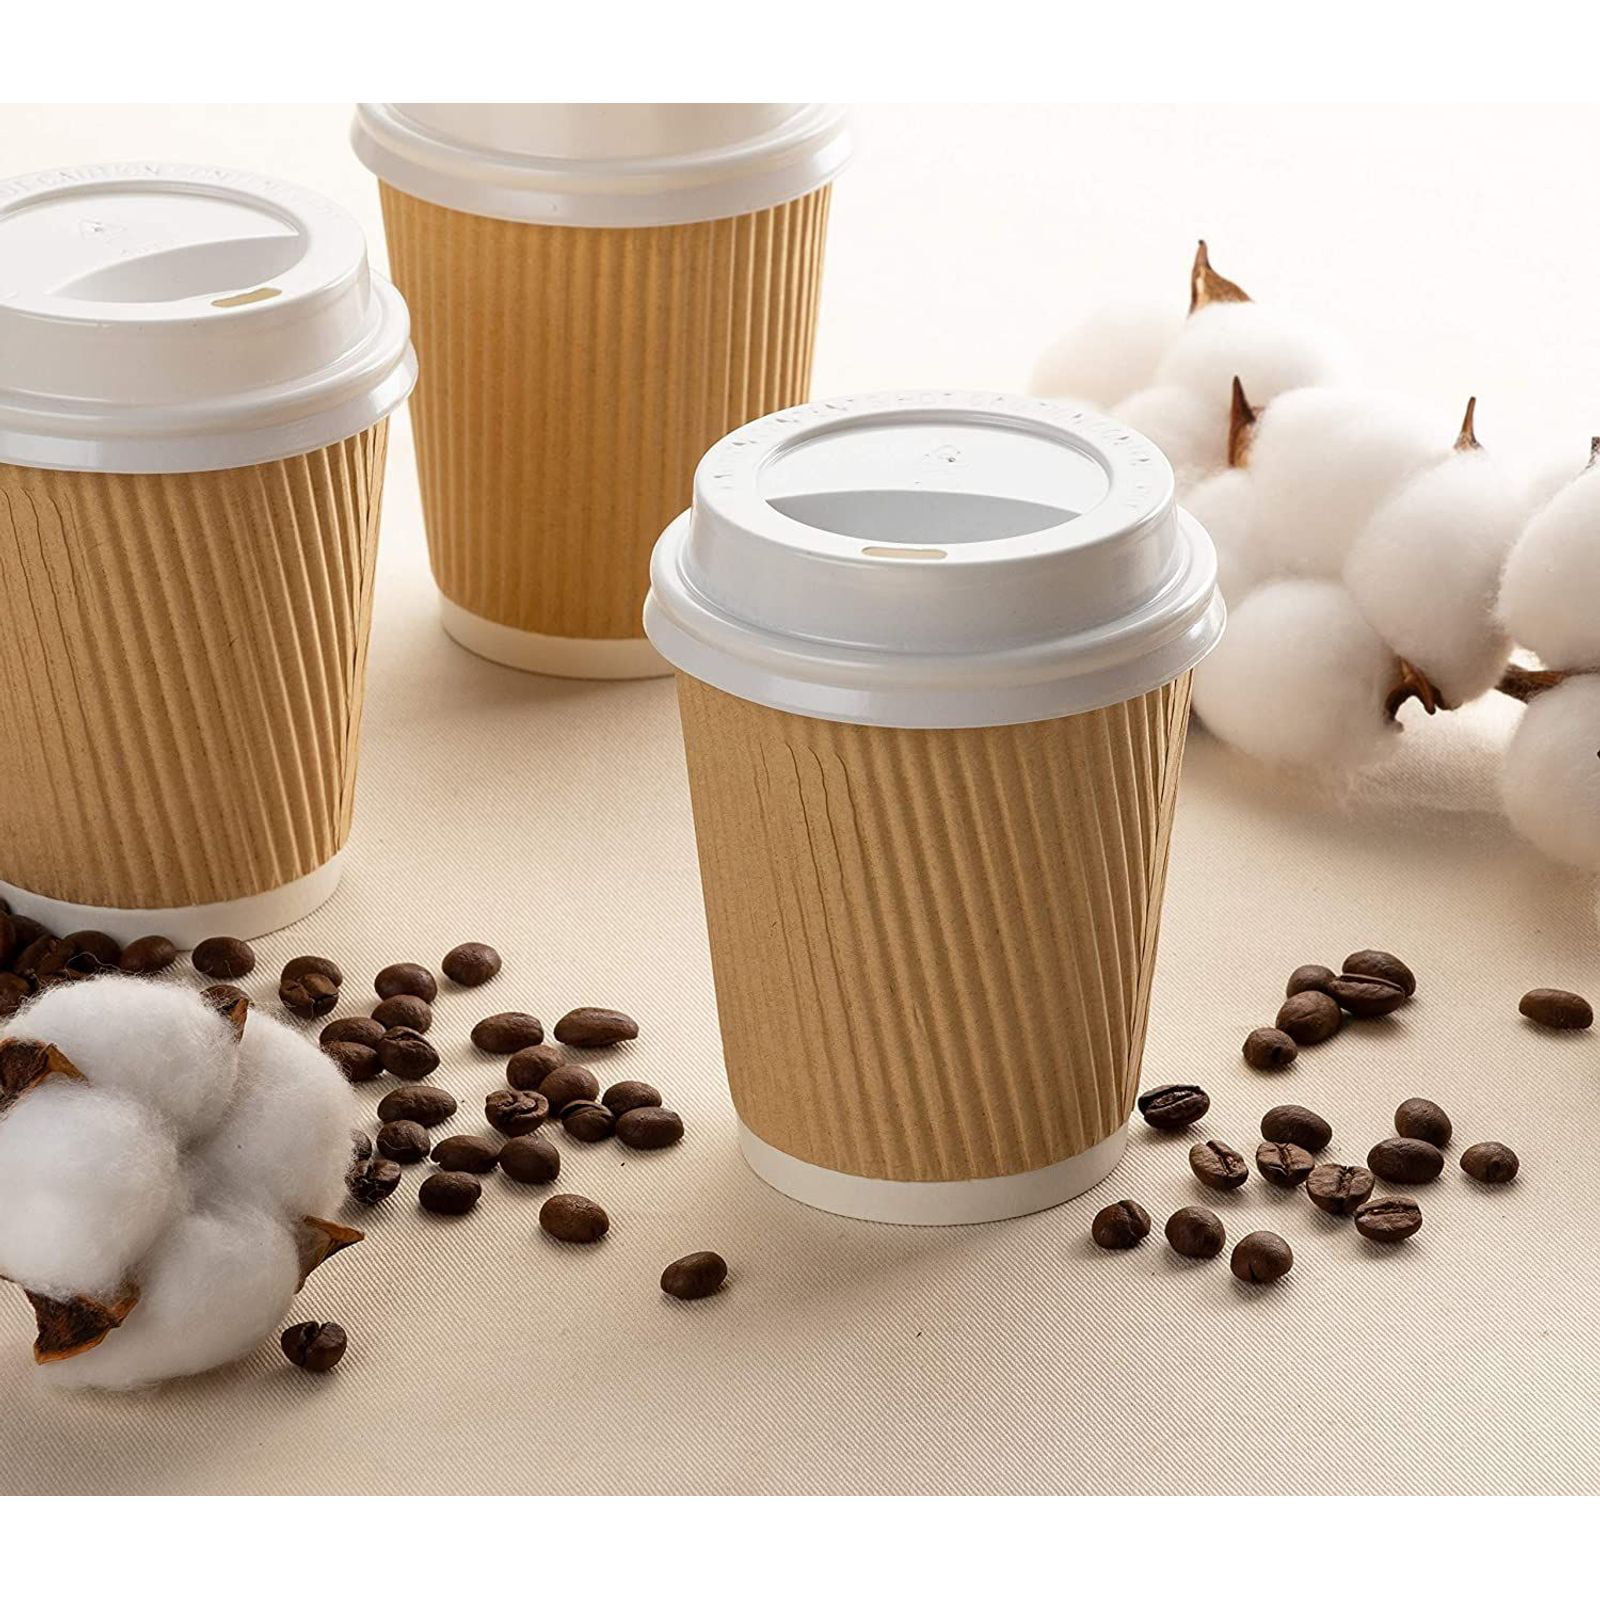 Details about   Set of 150 Ripple Insulated Kraft 6-oz Paper Cups Coffee/Tea Hot Cups ...